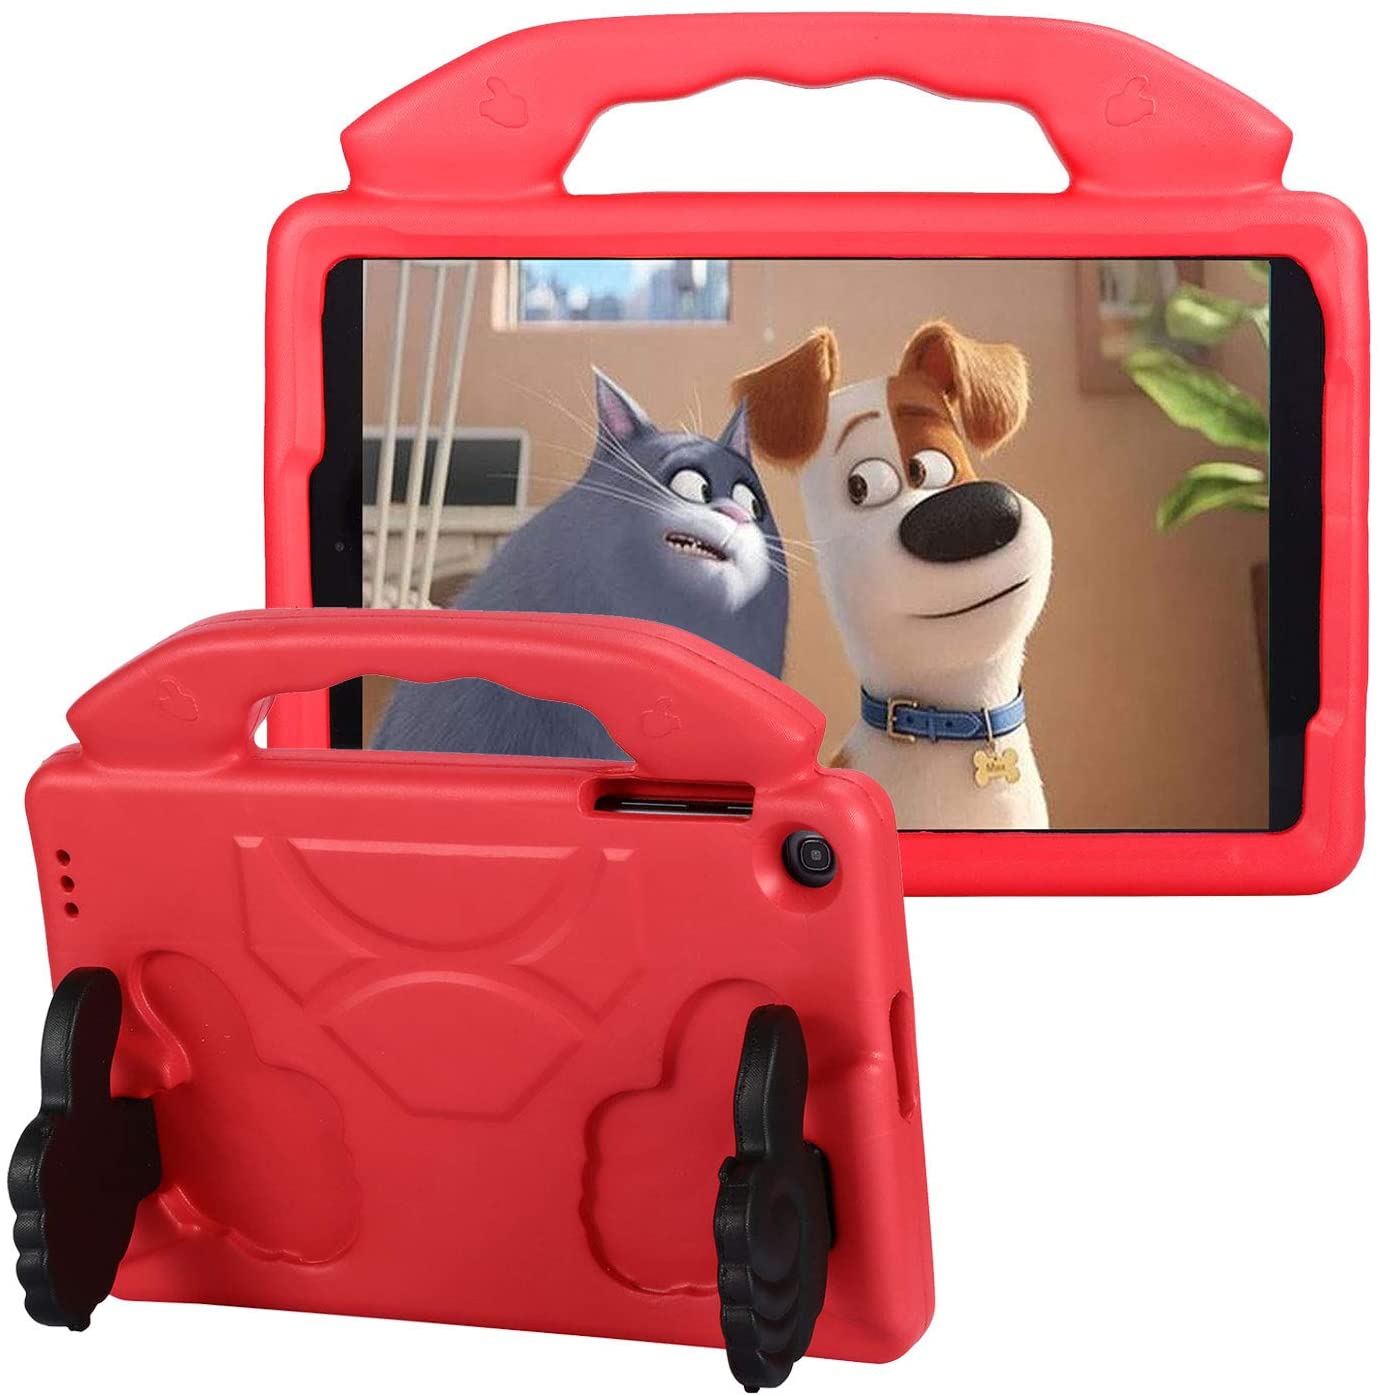 SHOCK KidProof Case - for Samsung Galaxy Tab A 10.1" 2019 Edition